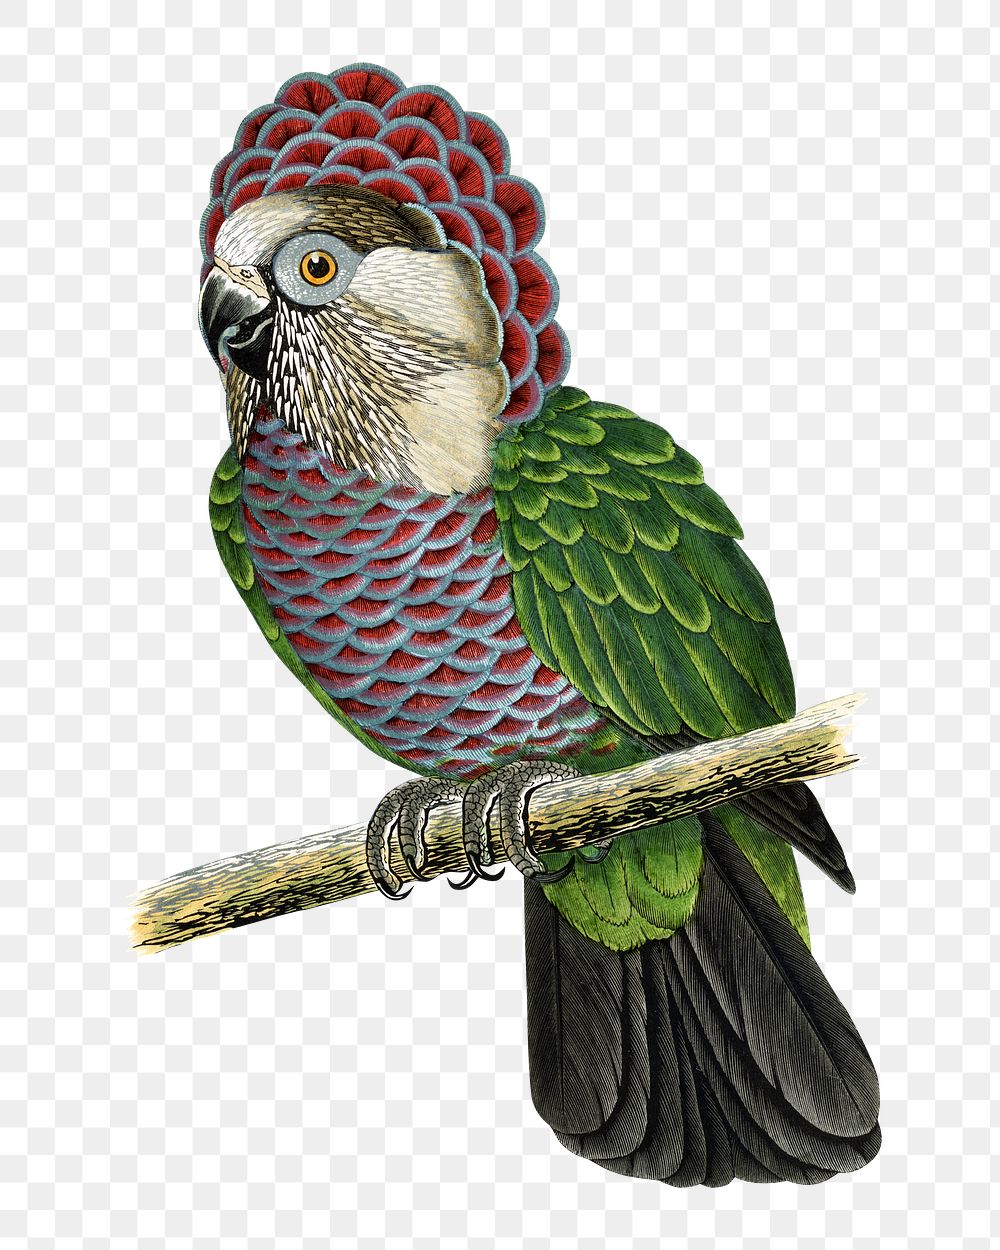 Vintage bird png hawk-headed parrot, transparent background. Remixed by rawpixel.